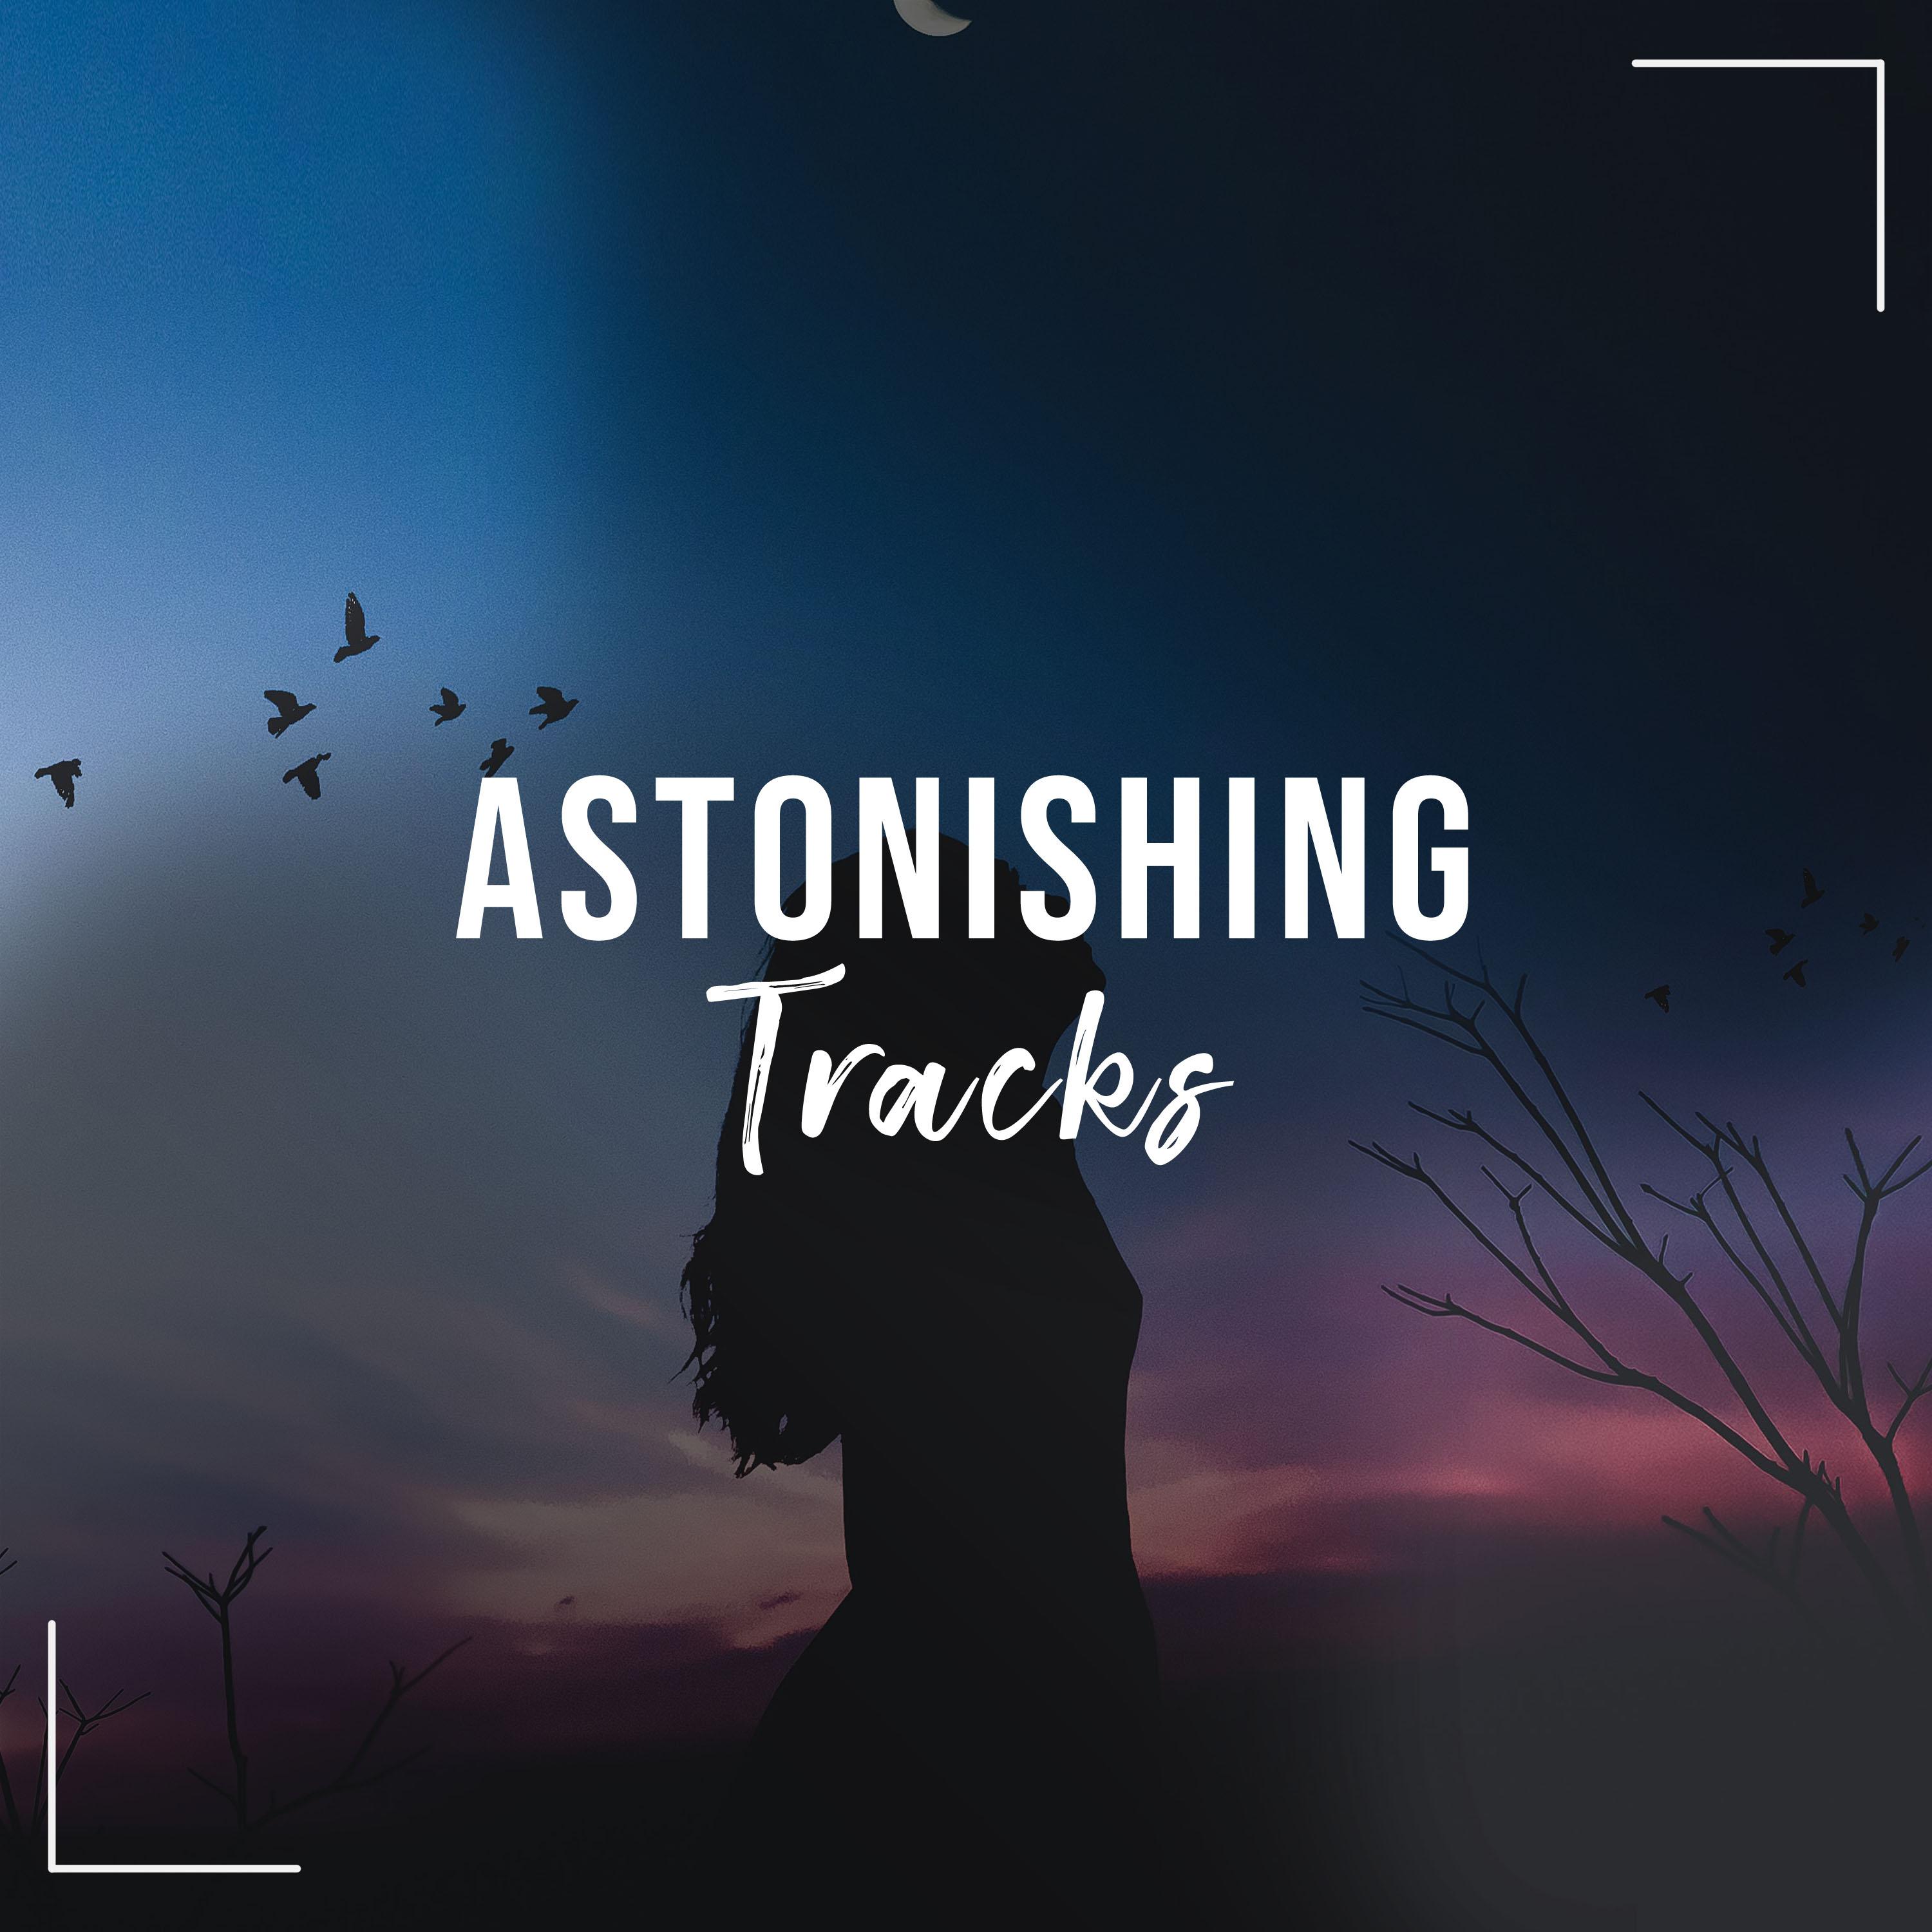 #19 Astonishing Tracks for Spa & Relaxation